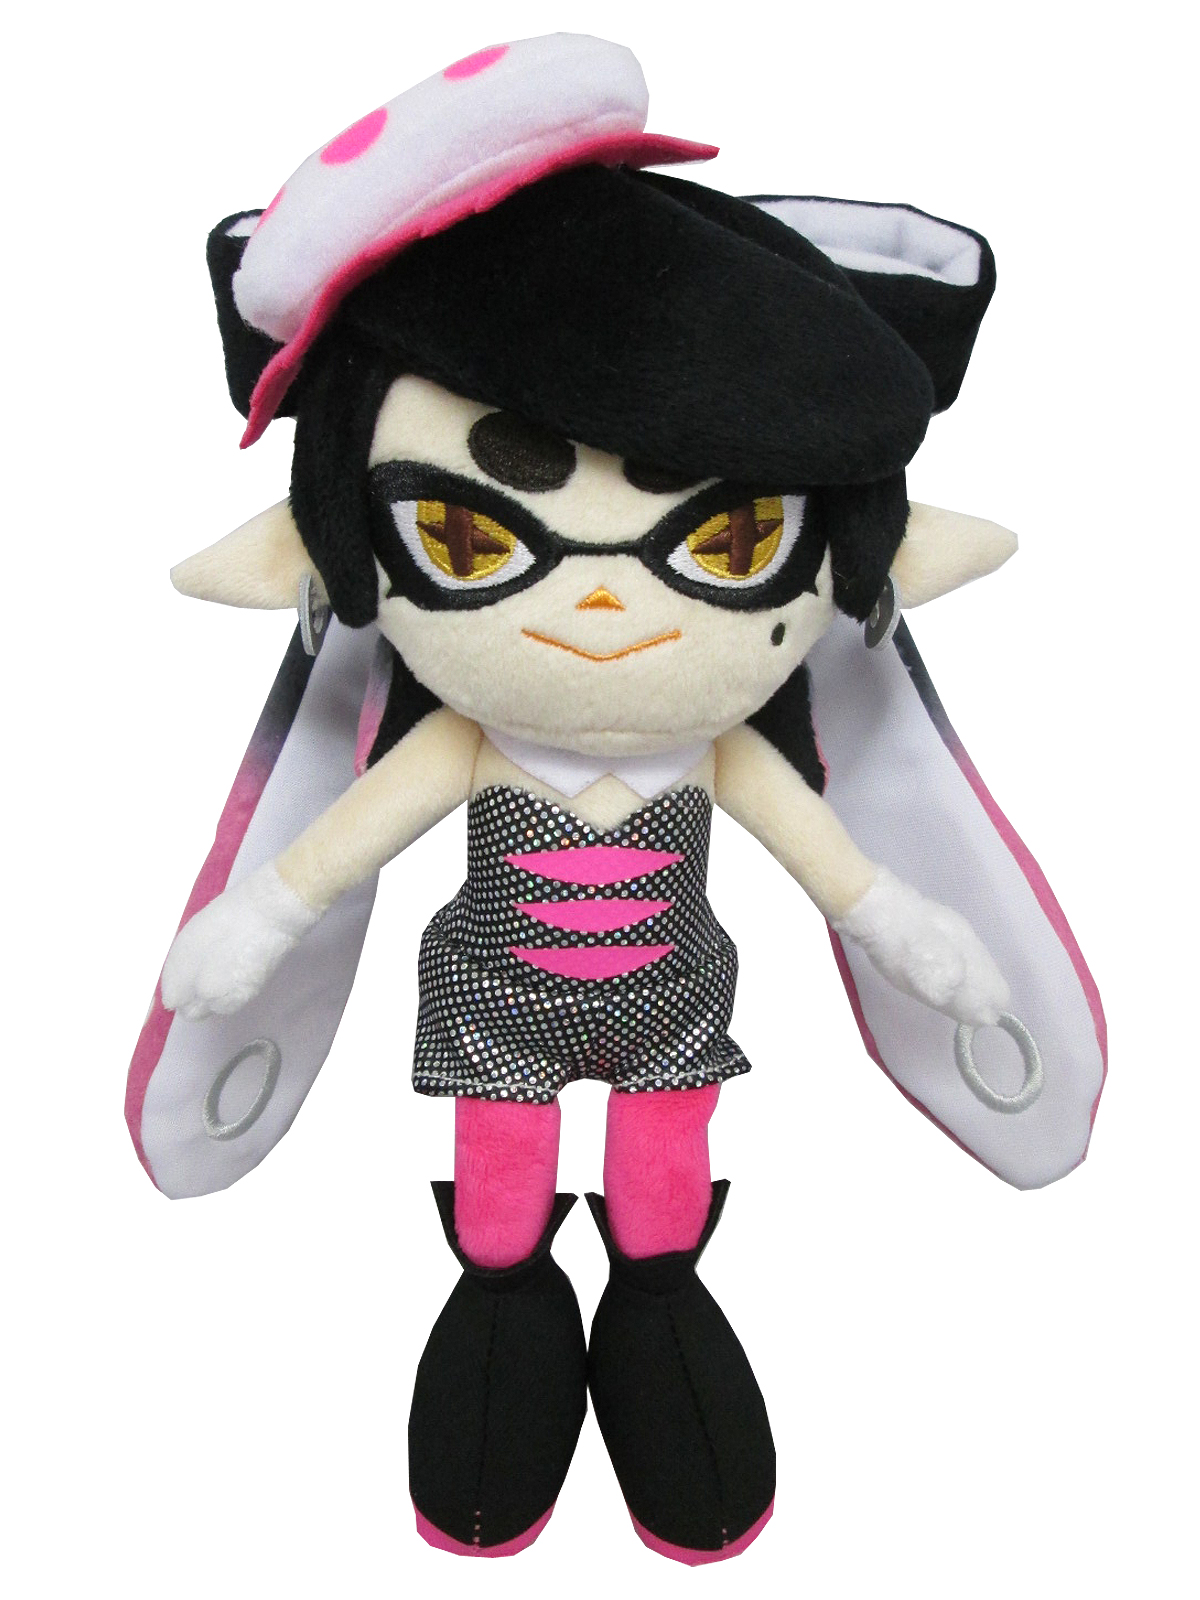 Snuggle Up to the Splatoon Soft Toy Collection